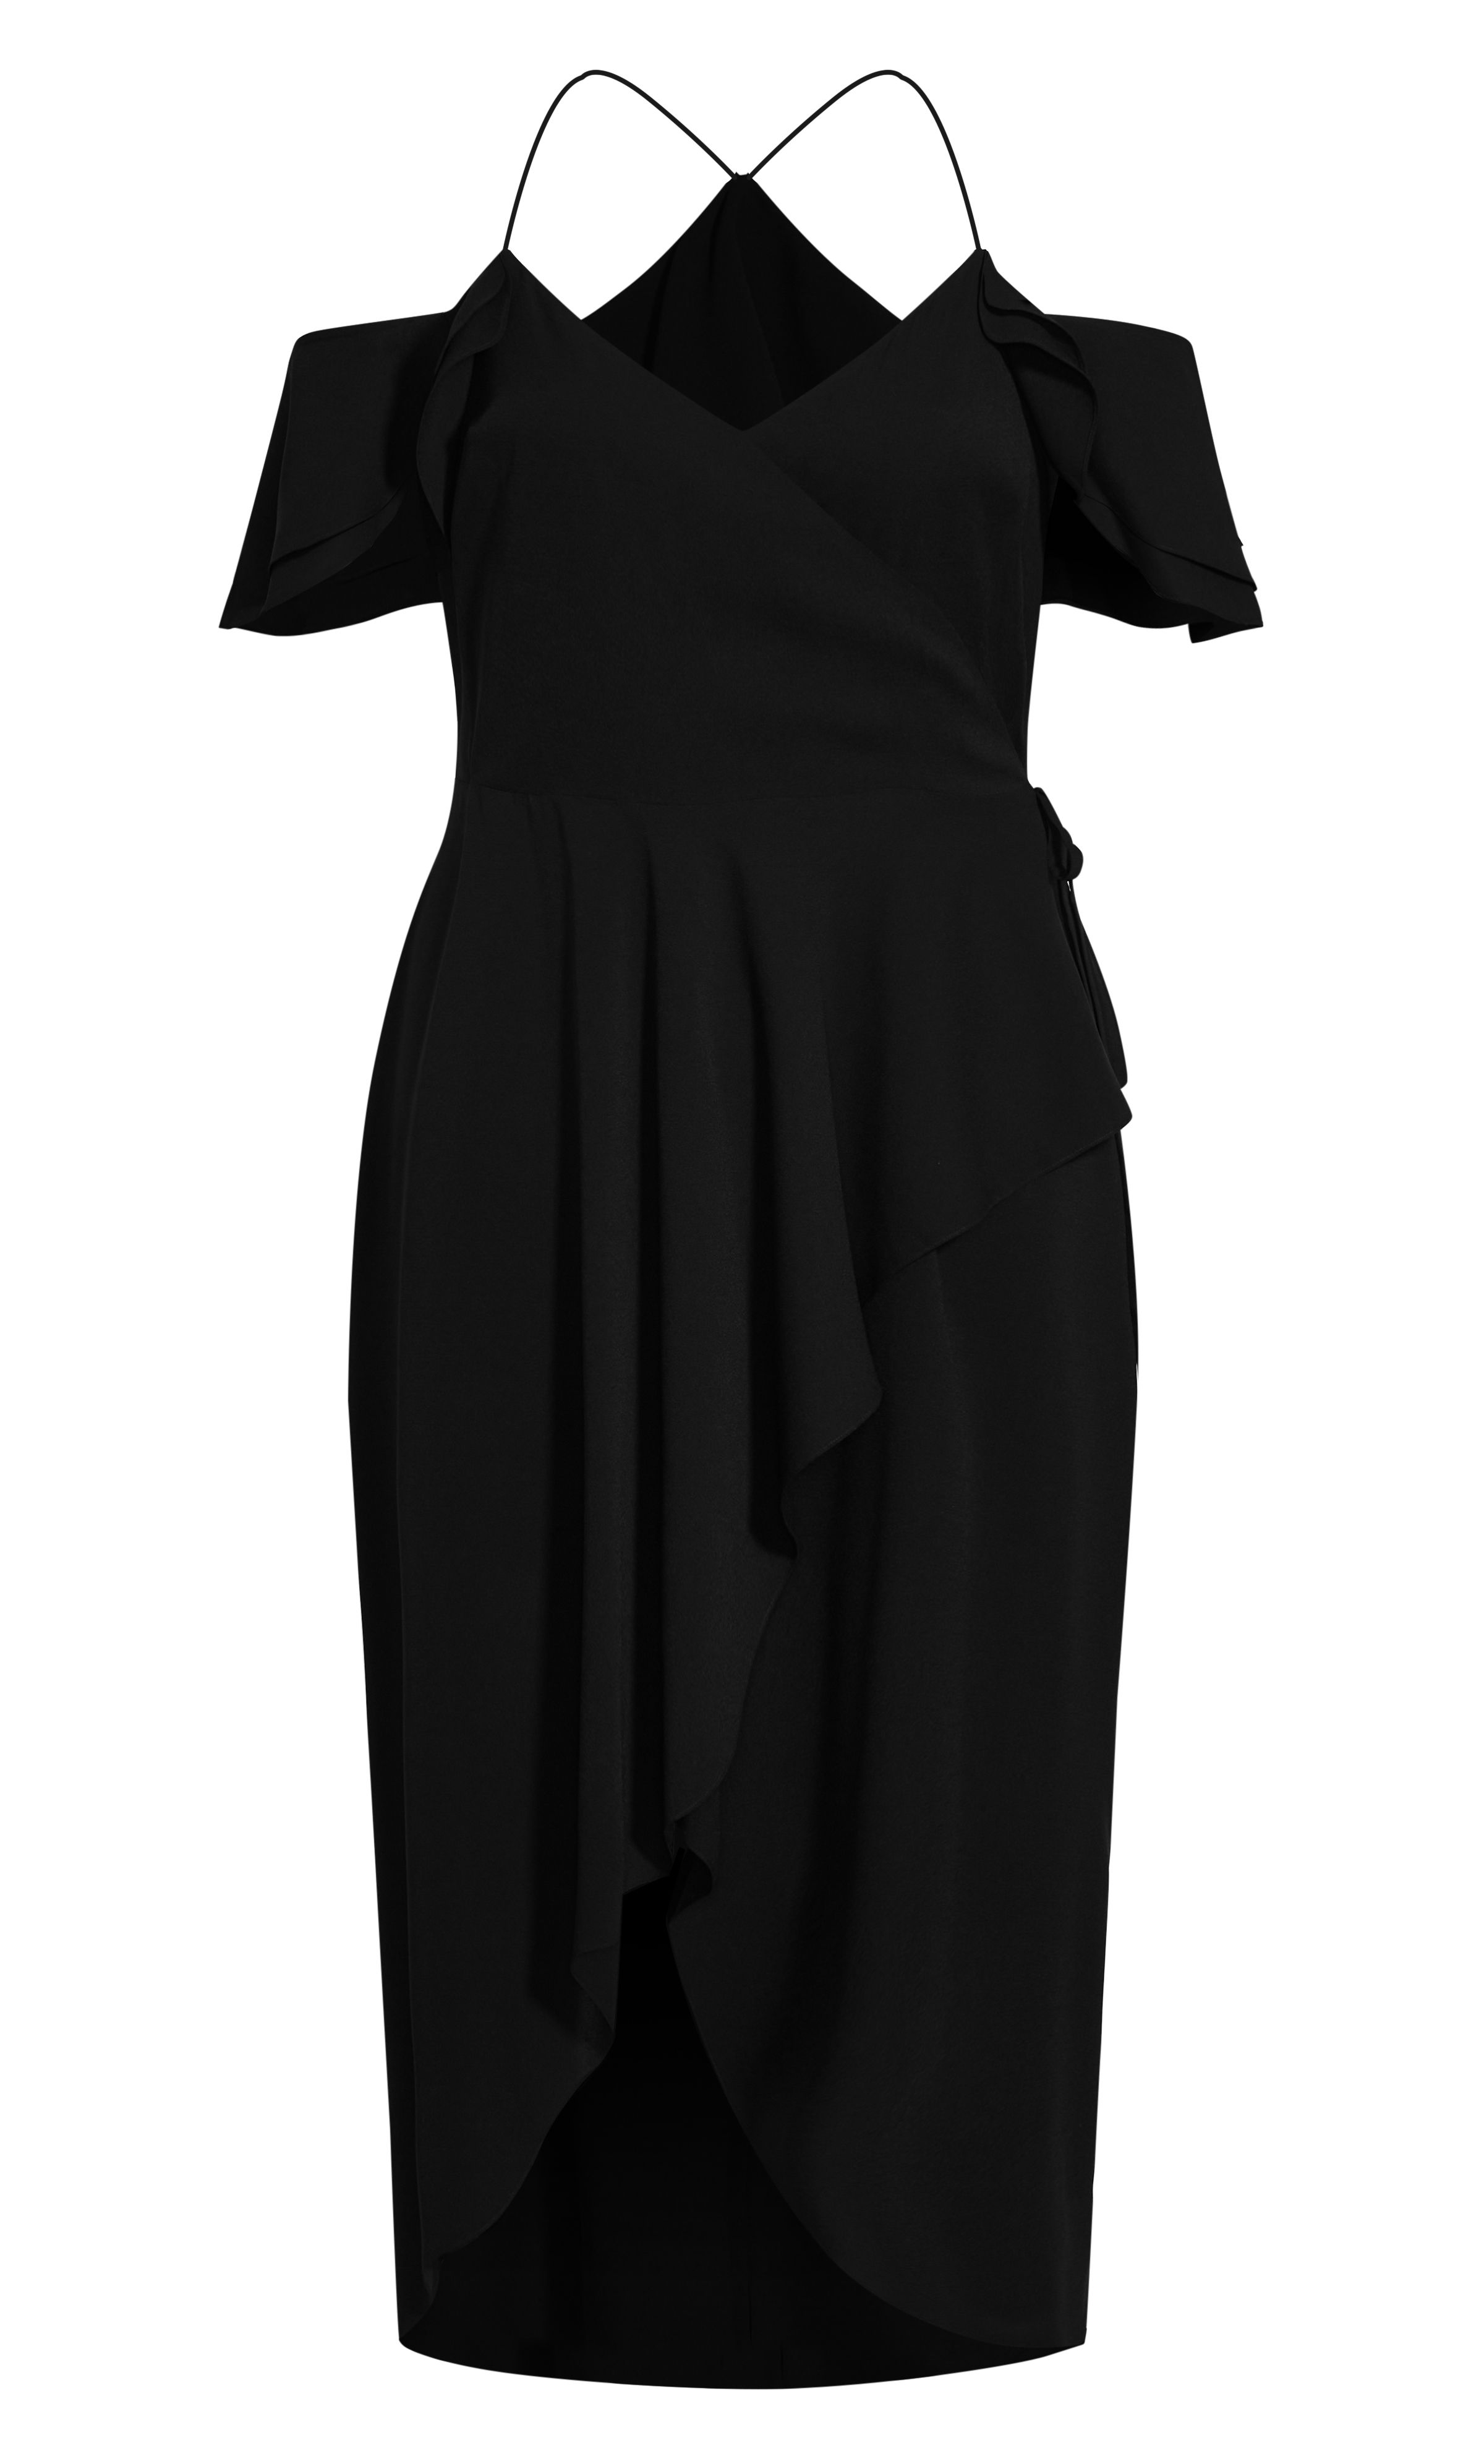 Define your style in the striking Elegant Maxi Dress! Featuring a deep V-neckline, a cold-shoulder silhouette, a sweeping maxi-length hemline and a true-wrap silhouette, this dreamy maxi dress knows how to define your curves. Key Features Include: - Deep V-neckline - Cold shoulder design with ruffle sleeve coverage - Racer back design with thin straps - True wrap closure with internal & external tie - Satin lined - Hi lo hemline - Maxi length Compliment this maxi dress to an elaborate up-do and a pair of statement earrings.